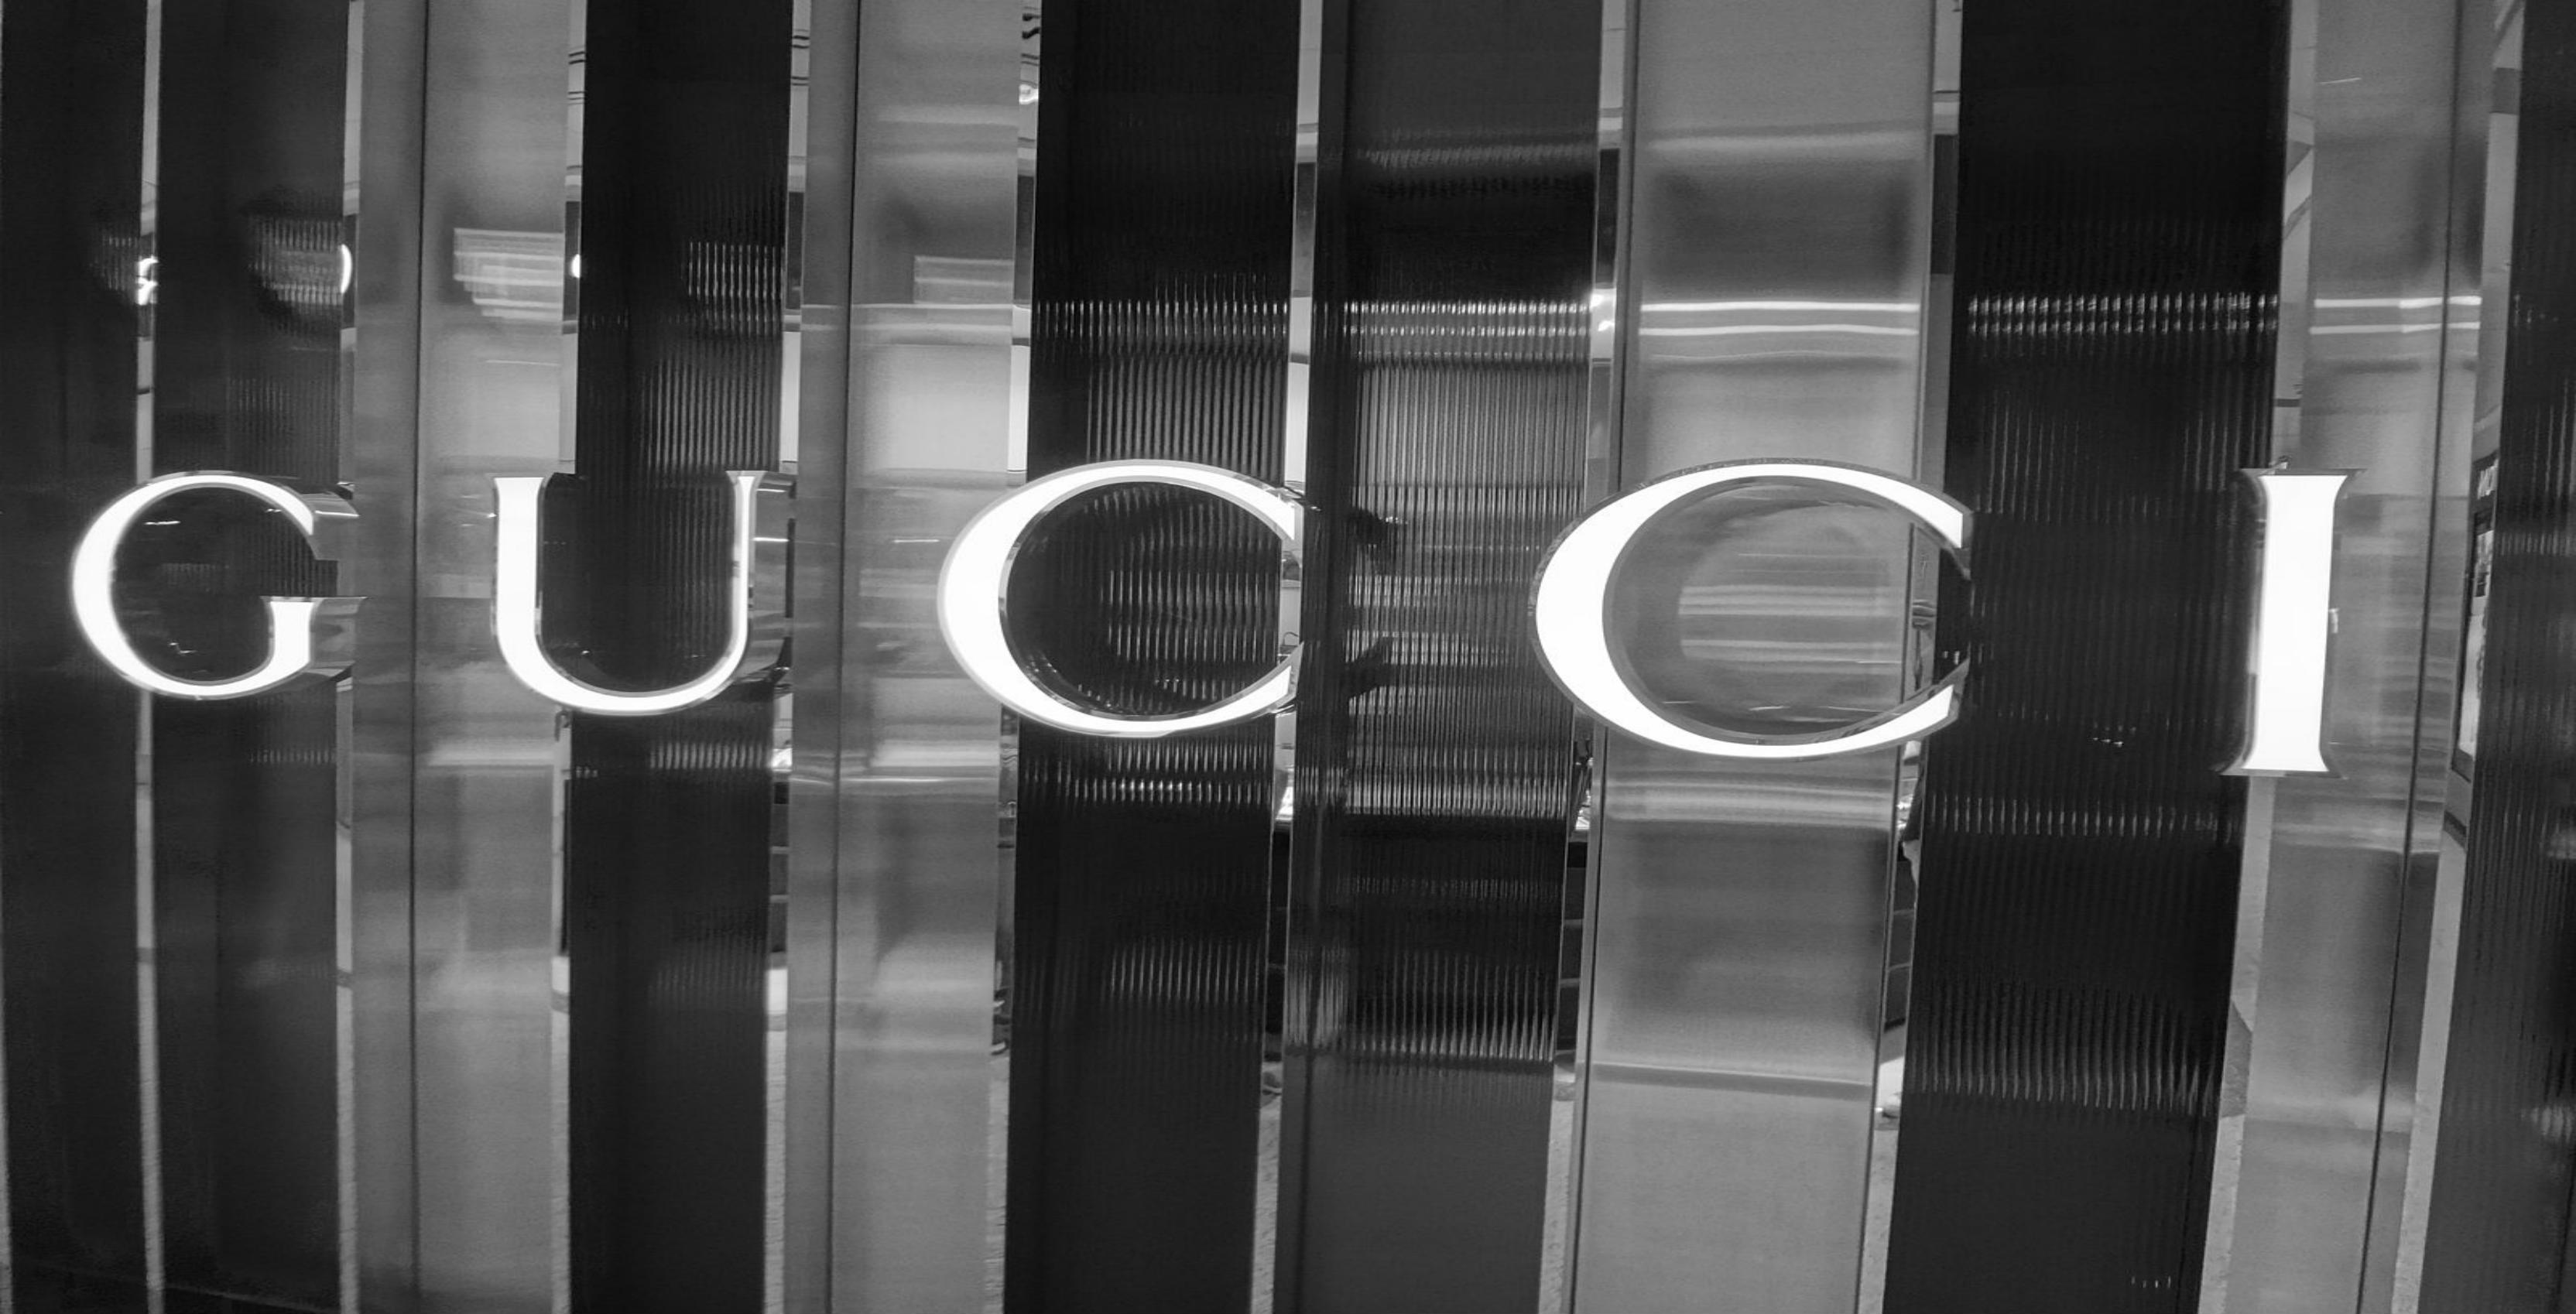 Gucci, Saint Laurent to create apps with Apple